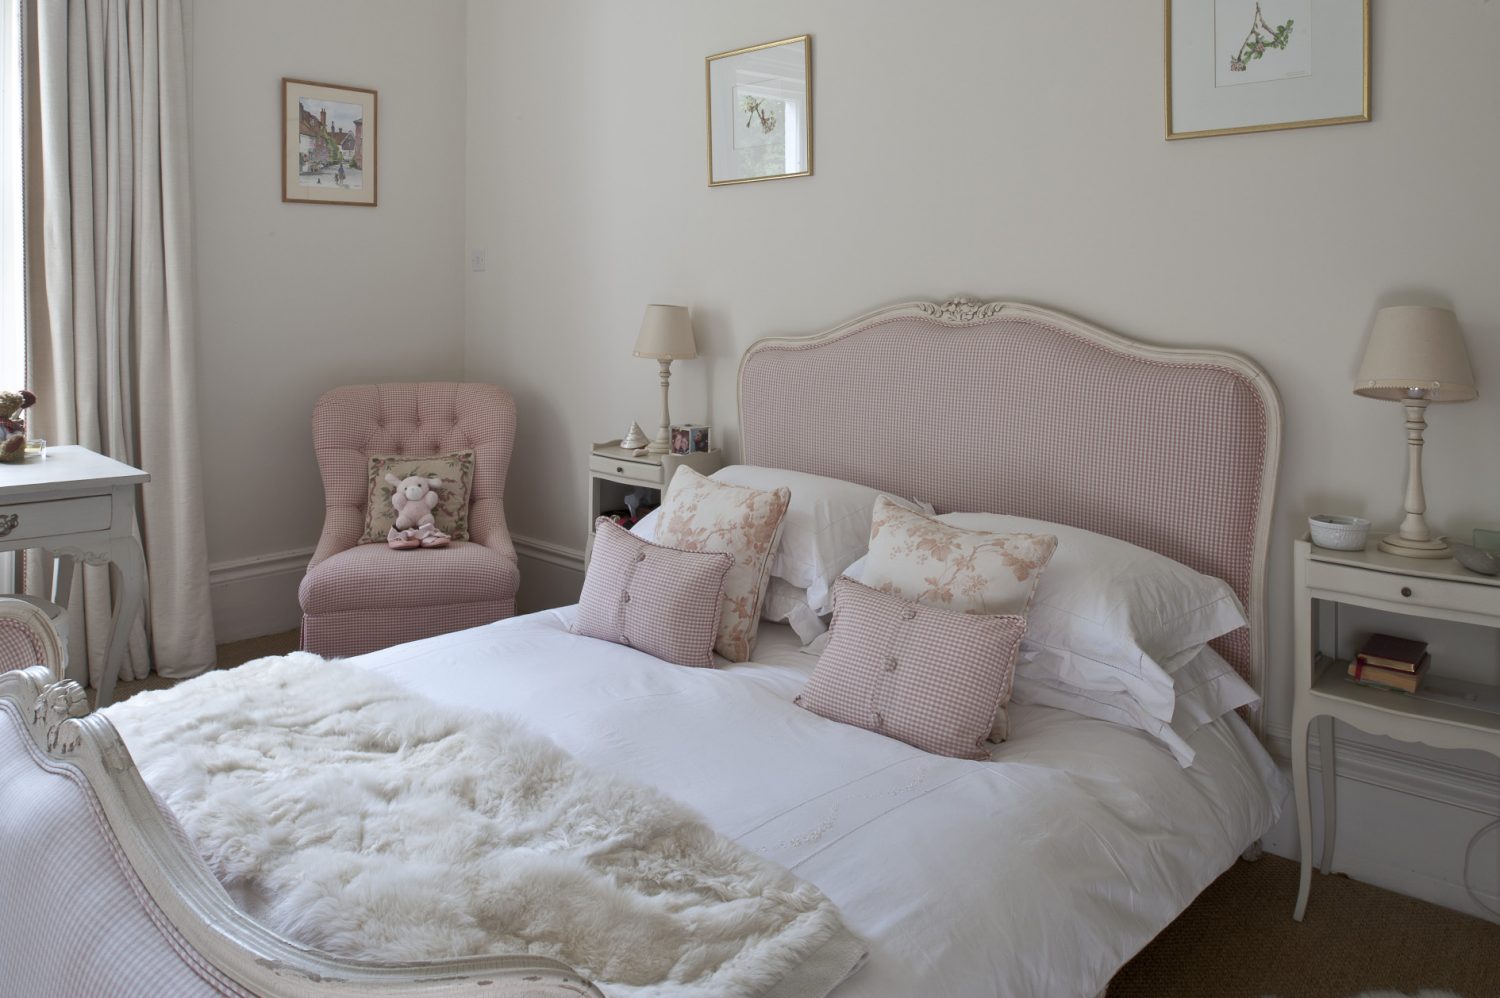 This French bed is from ’Tasha Interiors in Lamberhurst